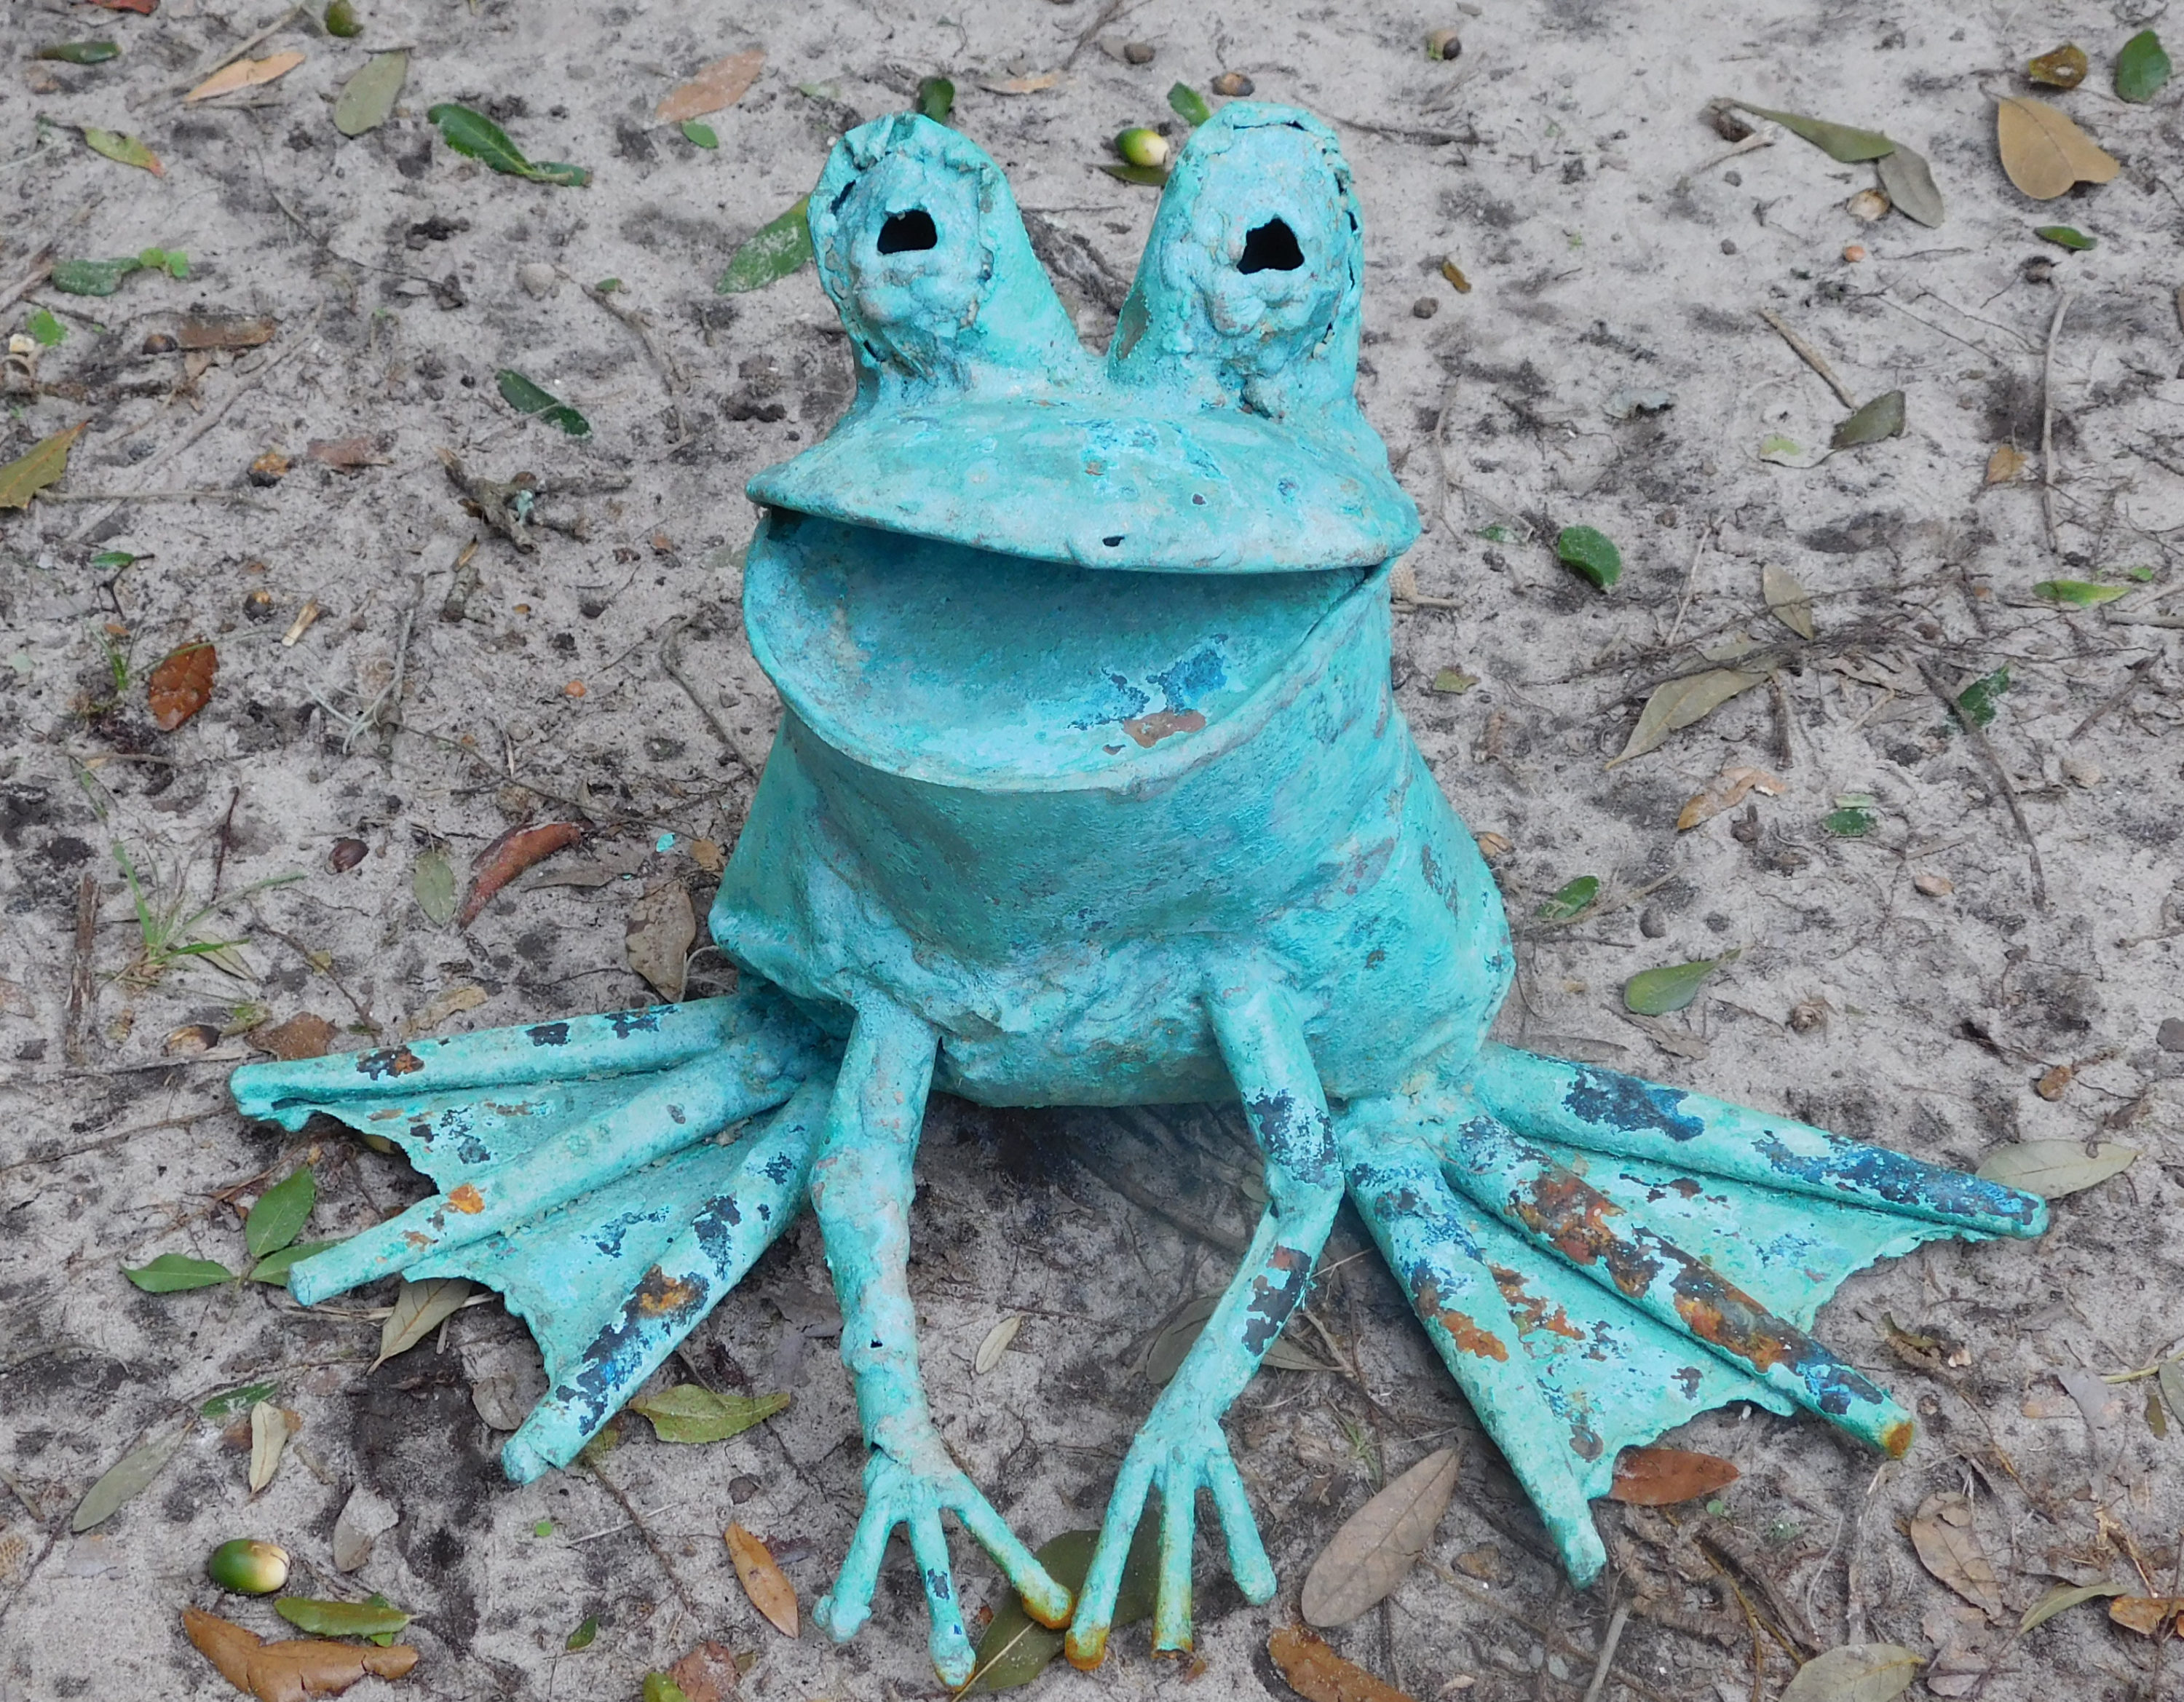 Beau Smith has been making large, human-sized frog sculptures for over thirty (30) years. He also makes smaller frogs (but not too small). Main website: http://beautifulfrog.com/